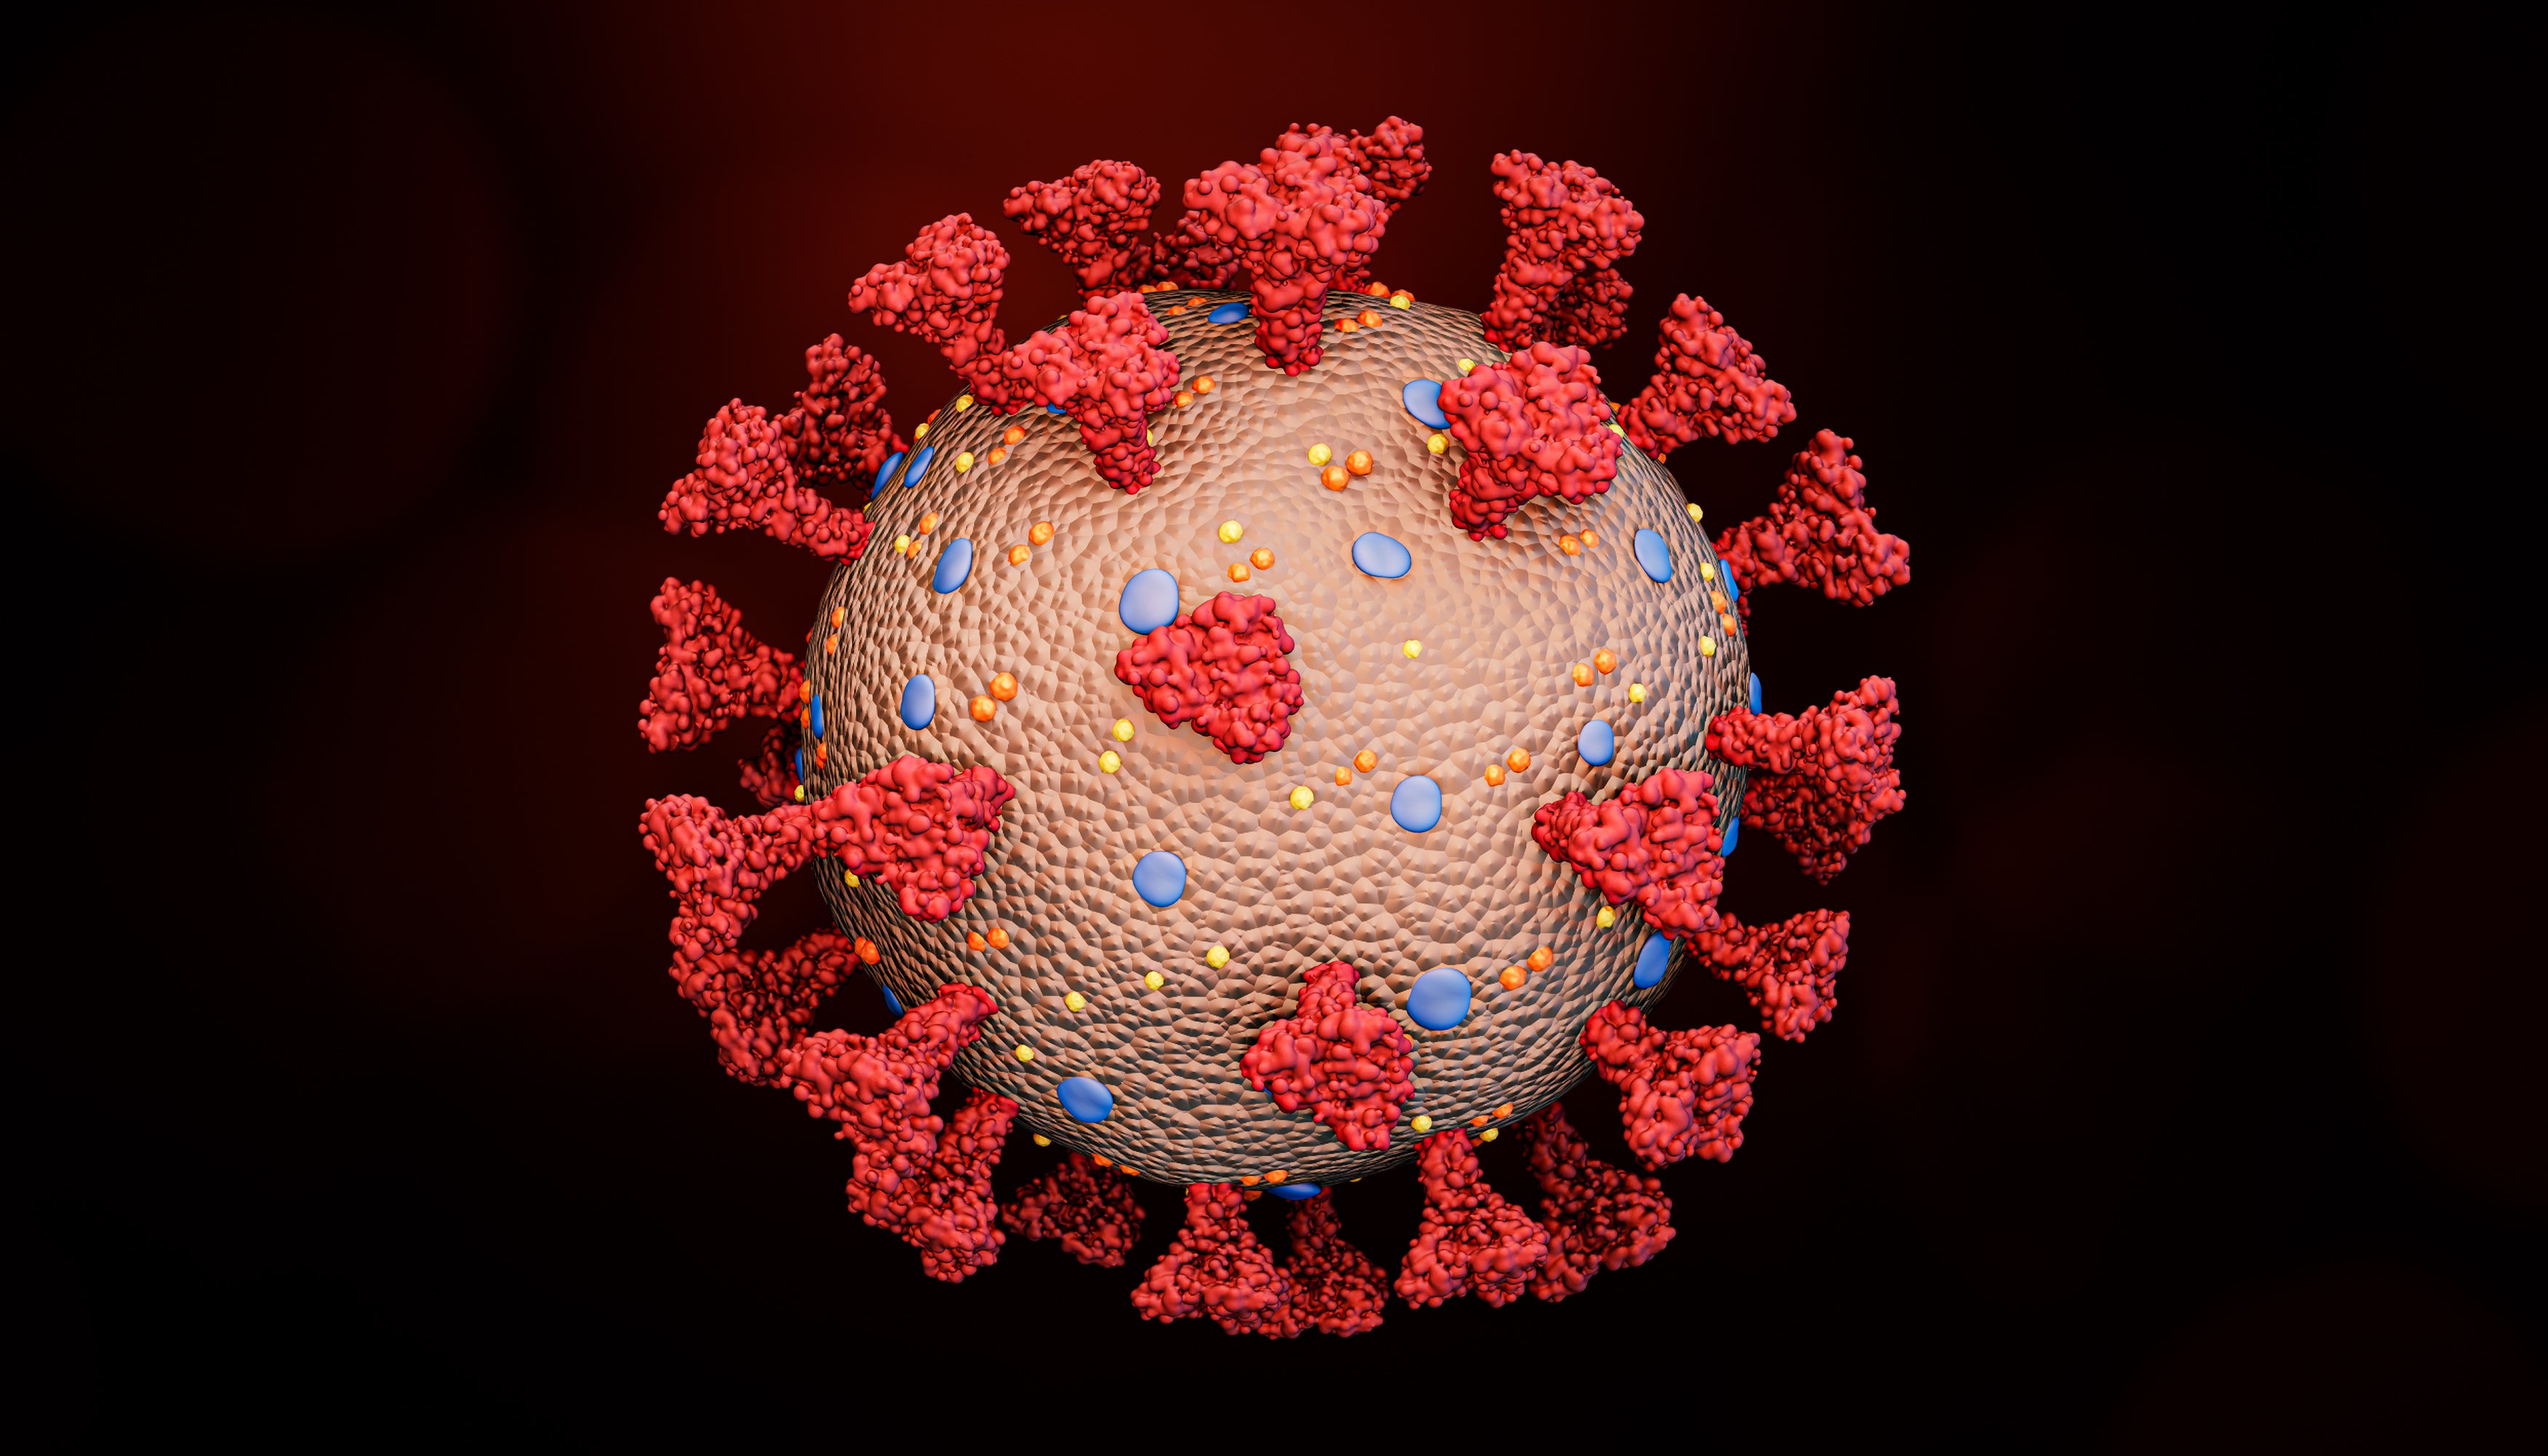 How the SARS-CoV-2 virus acquires its spherical shape